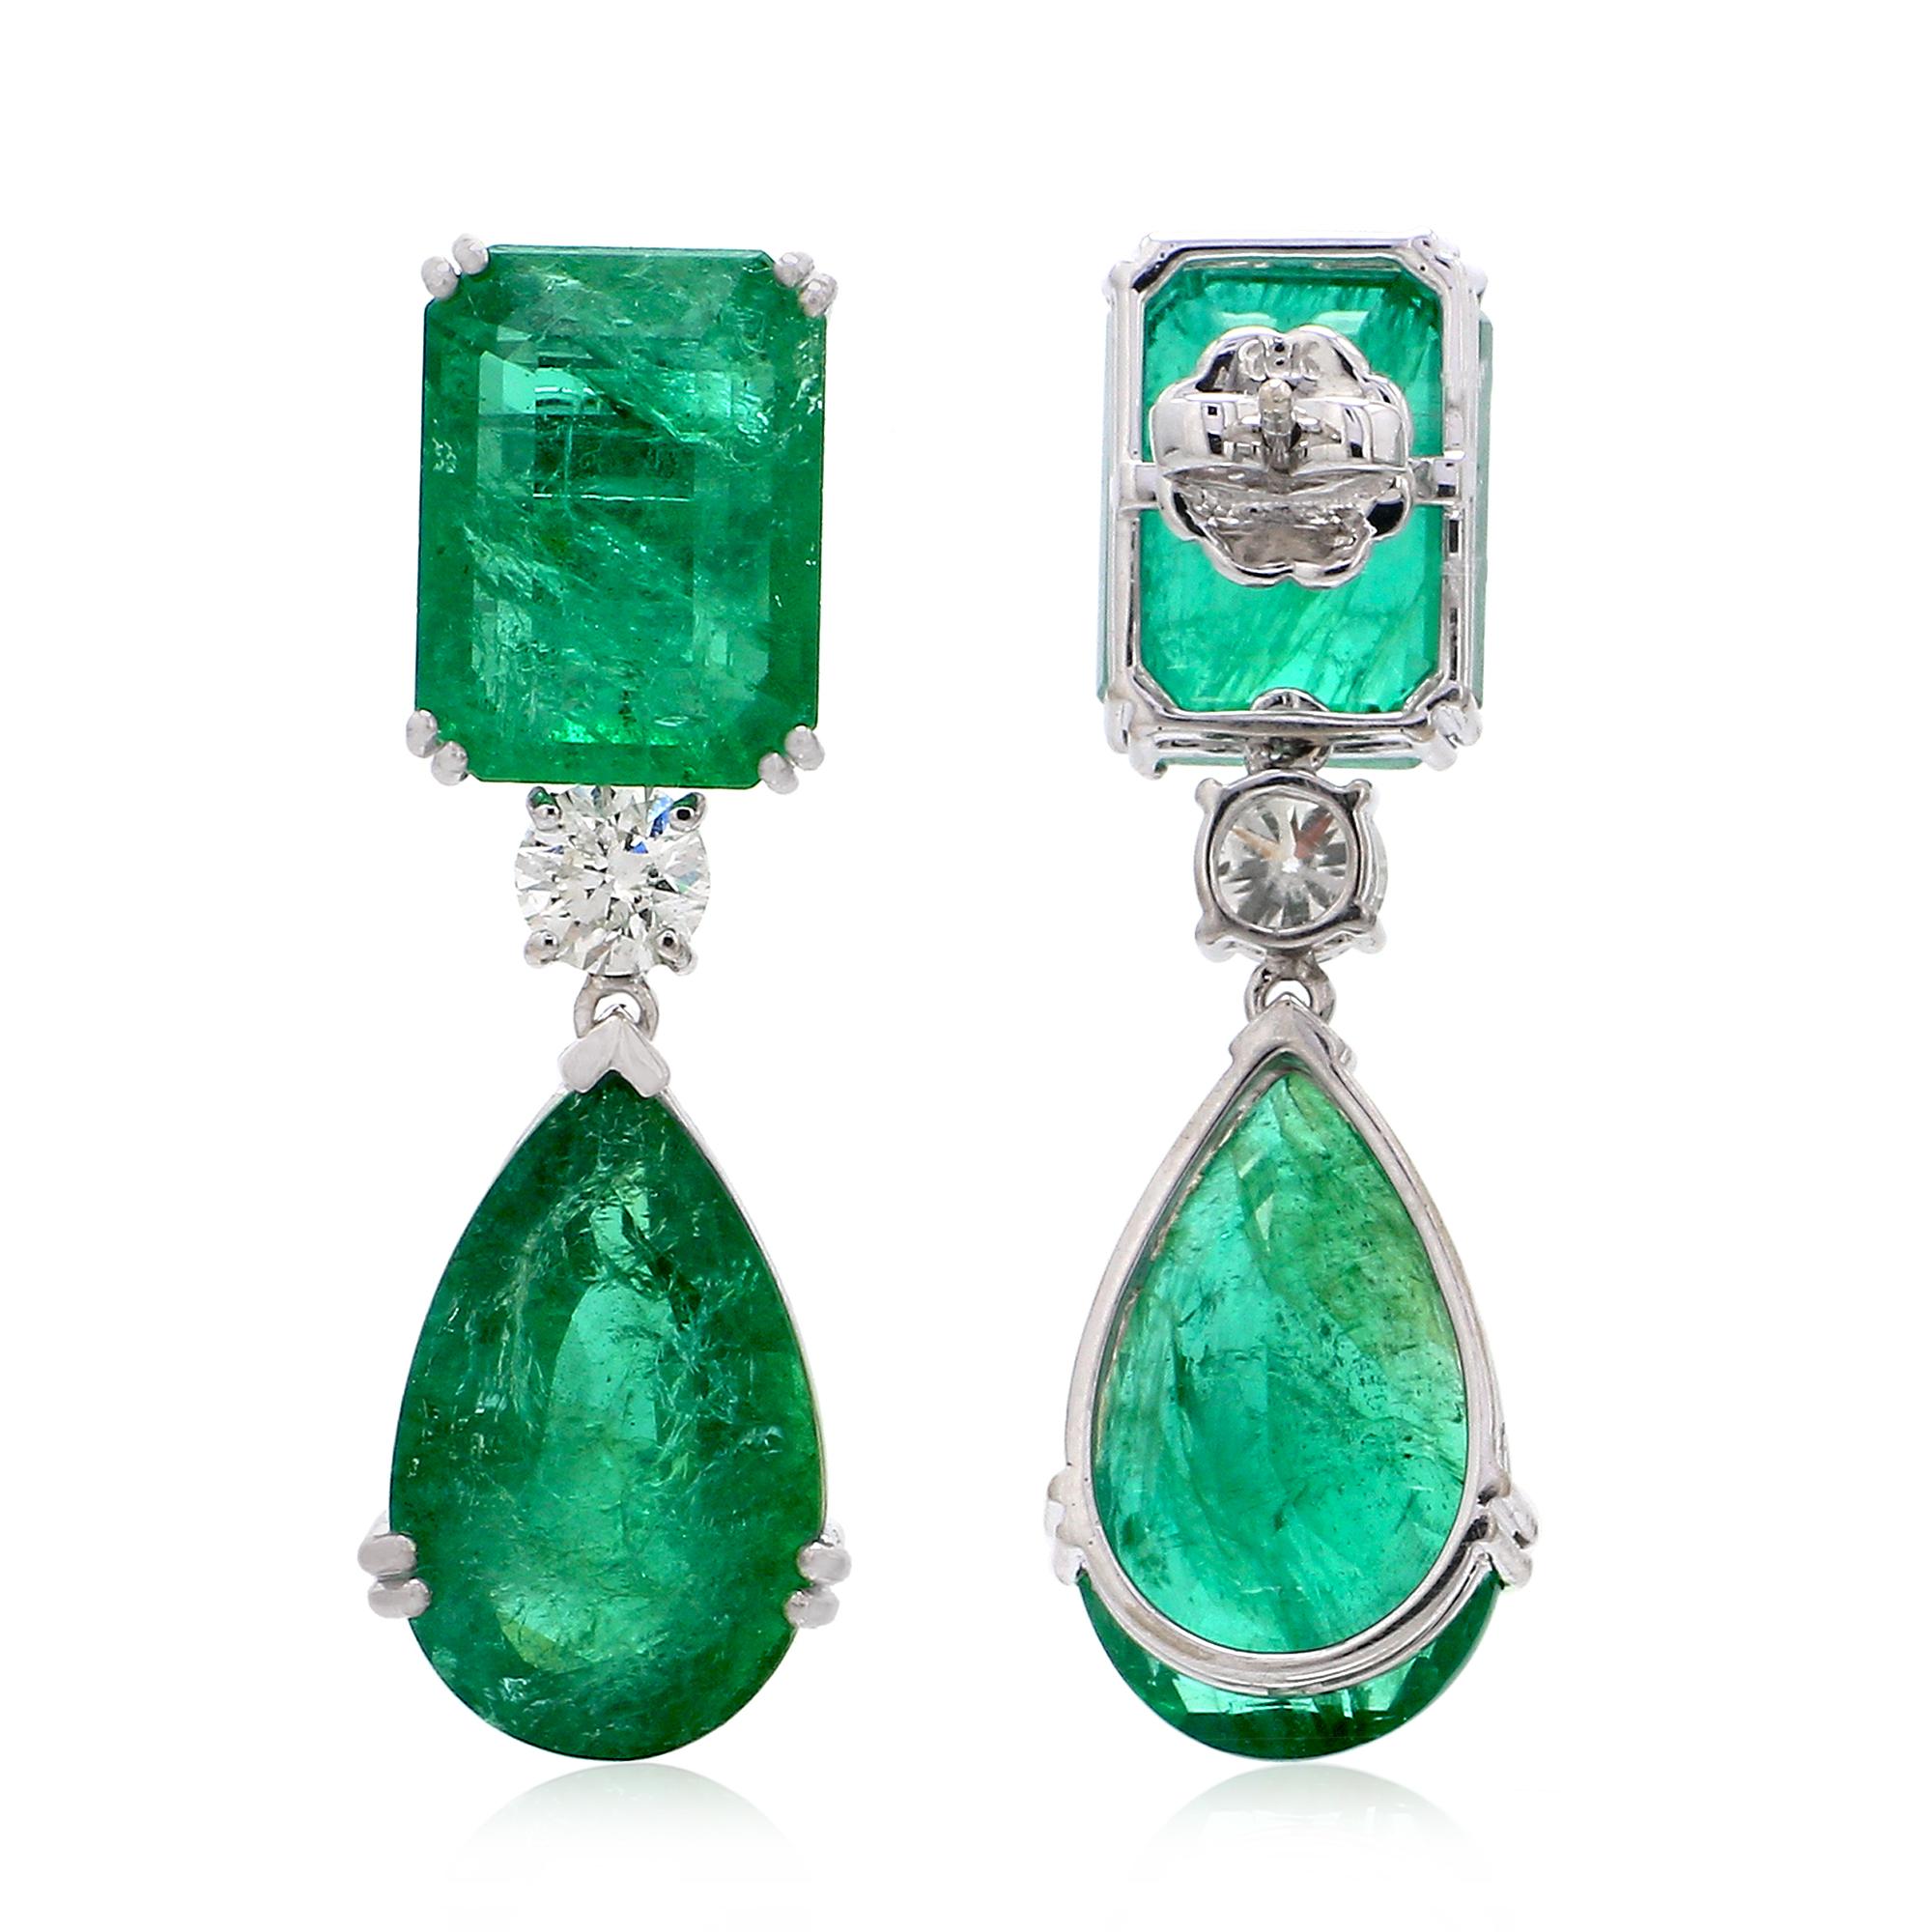 Item Code :- CN-24578
Gross Wt. :- 14.12 gm
18k White Gold Wt. :- 7.64 gm
Diamond Wt. :- 1.00 Ct. ( AVERAGE DIAMOND CLARITY SI1-SI2 & COLOR H-I )
Emerald Wt. :- 31.40 Ct.
Earrings Size :- 37.50 mm approx.
Earrings Width :- 11 mm approx.
✦